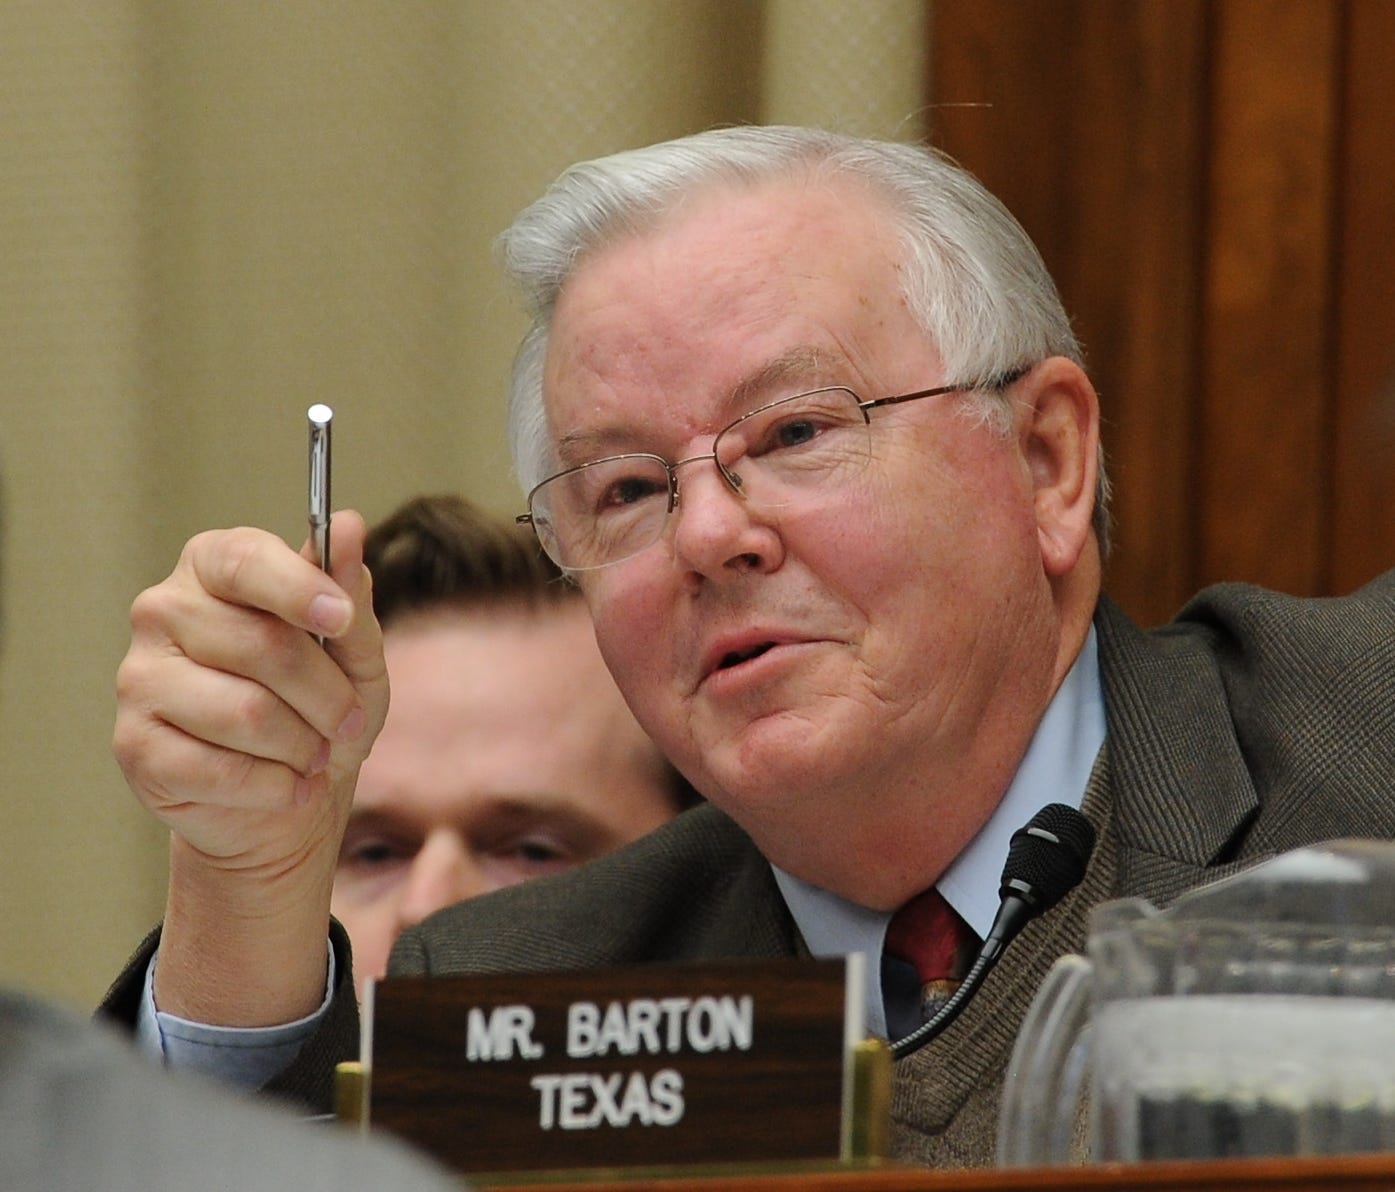 Rep. Joe Barton, R-Texas, is pictured questioning witnesses at an Energy and Commerce Committee.